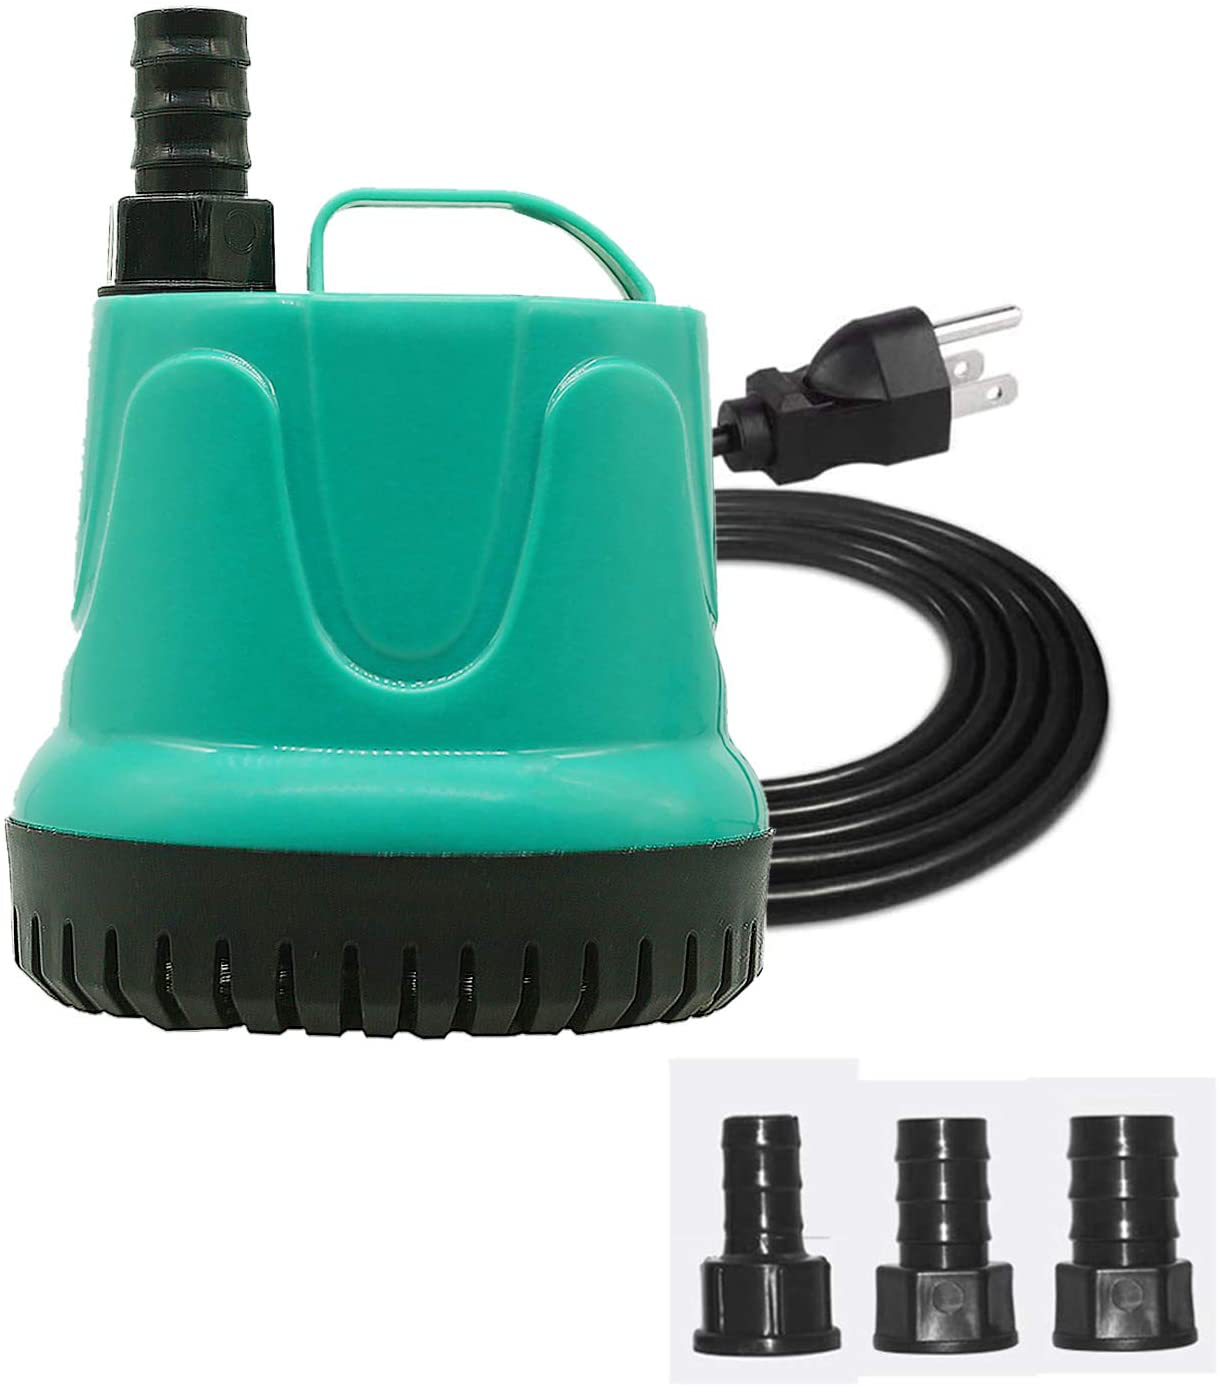 Upettools Submersible Water Pump, Ultra Silence Circulation Multifunctional Water Pump with Handle for Pond, Aquarium, Hydroponics, Fish Tank Fountain with 4.6Ft (1.4M) Power Cord